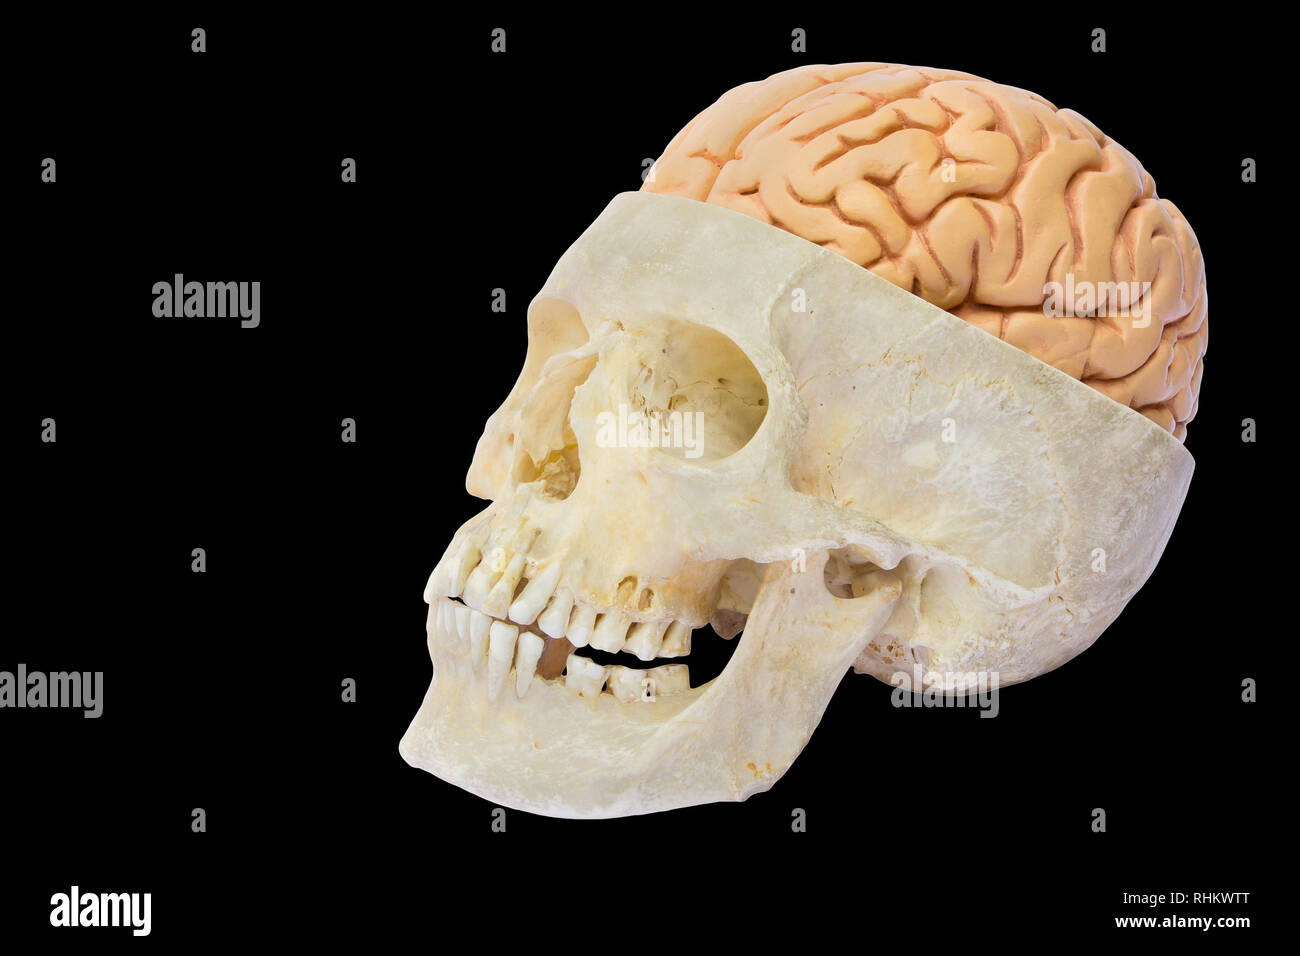 Human skull with model of brains isolated on black background Stock Photo